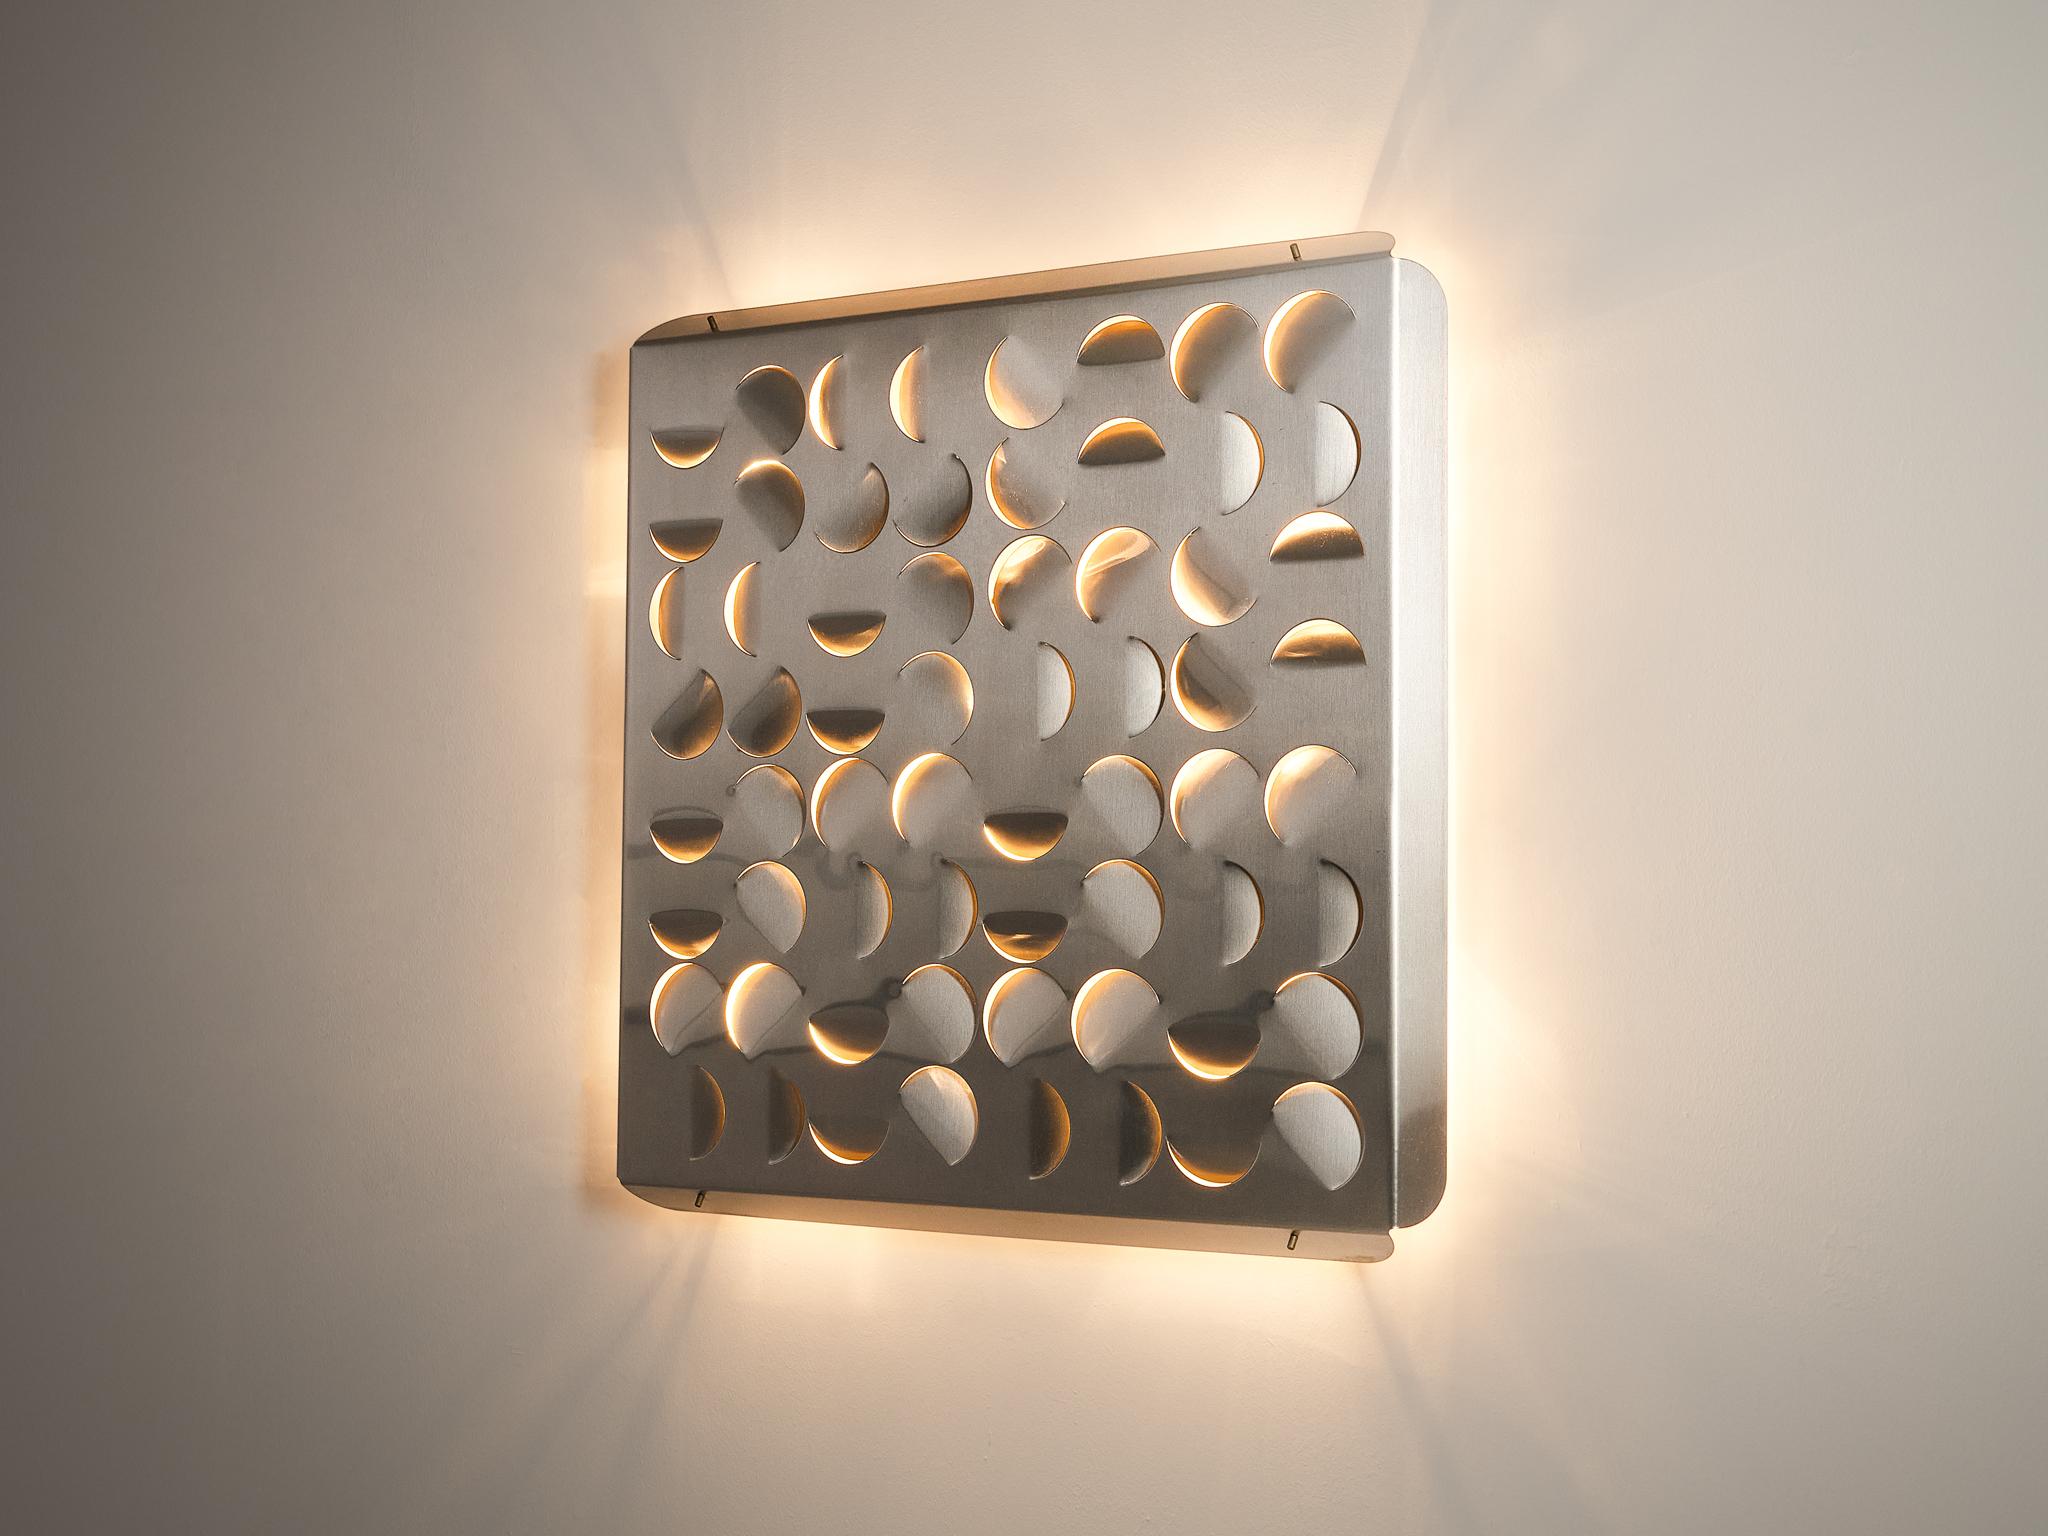 Giacomo Benevelli for Missaglia, 'Arabesco' wall-mounted light sculpture, metal, Italy, circa 1967

Italian designer and sculptor Giacomo Benevelli (1925-2011) designed this mesmerizing light sculpture around 1967. He is known for utilizing metal as